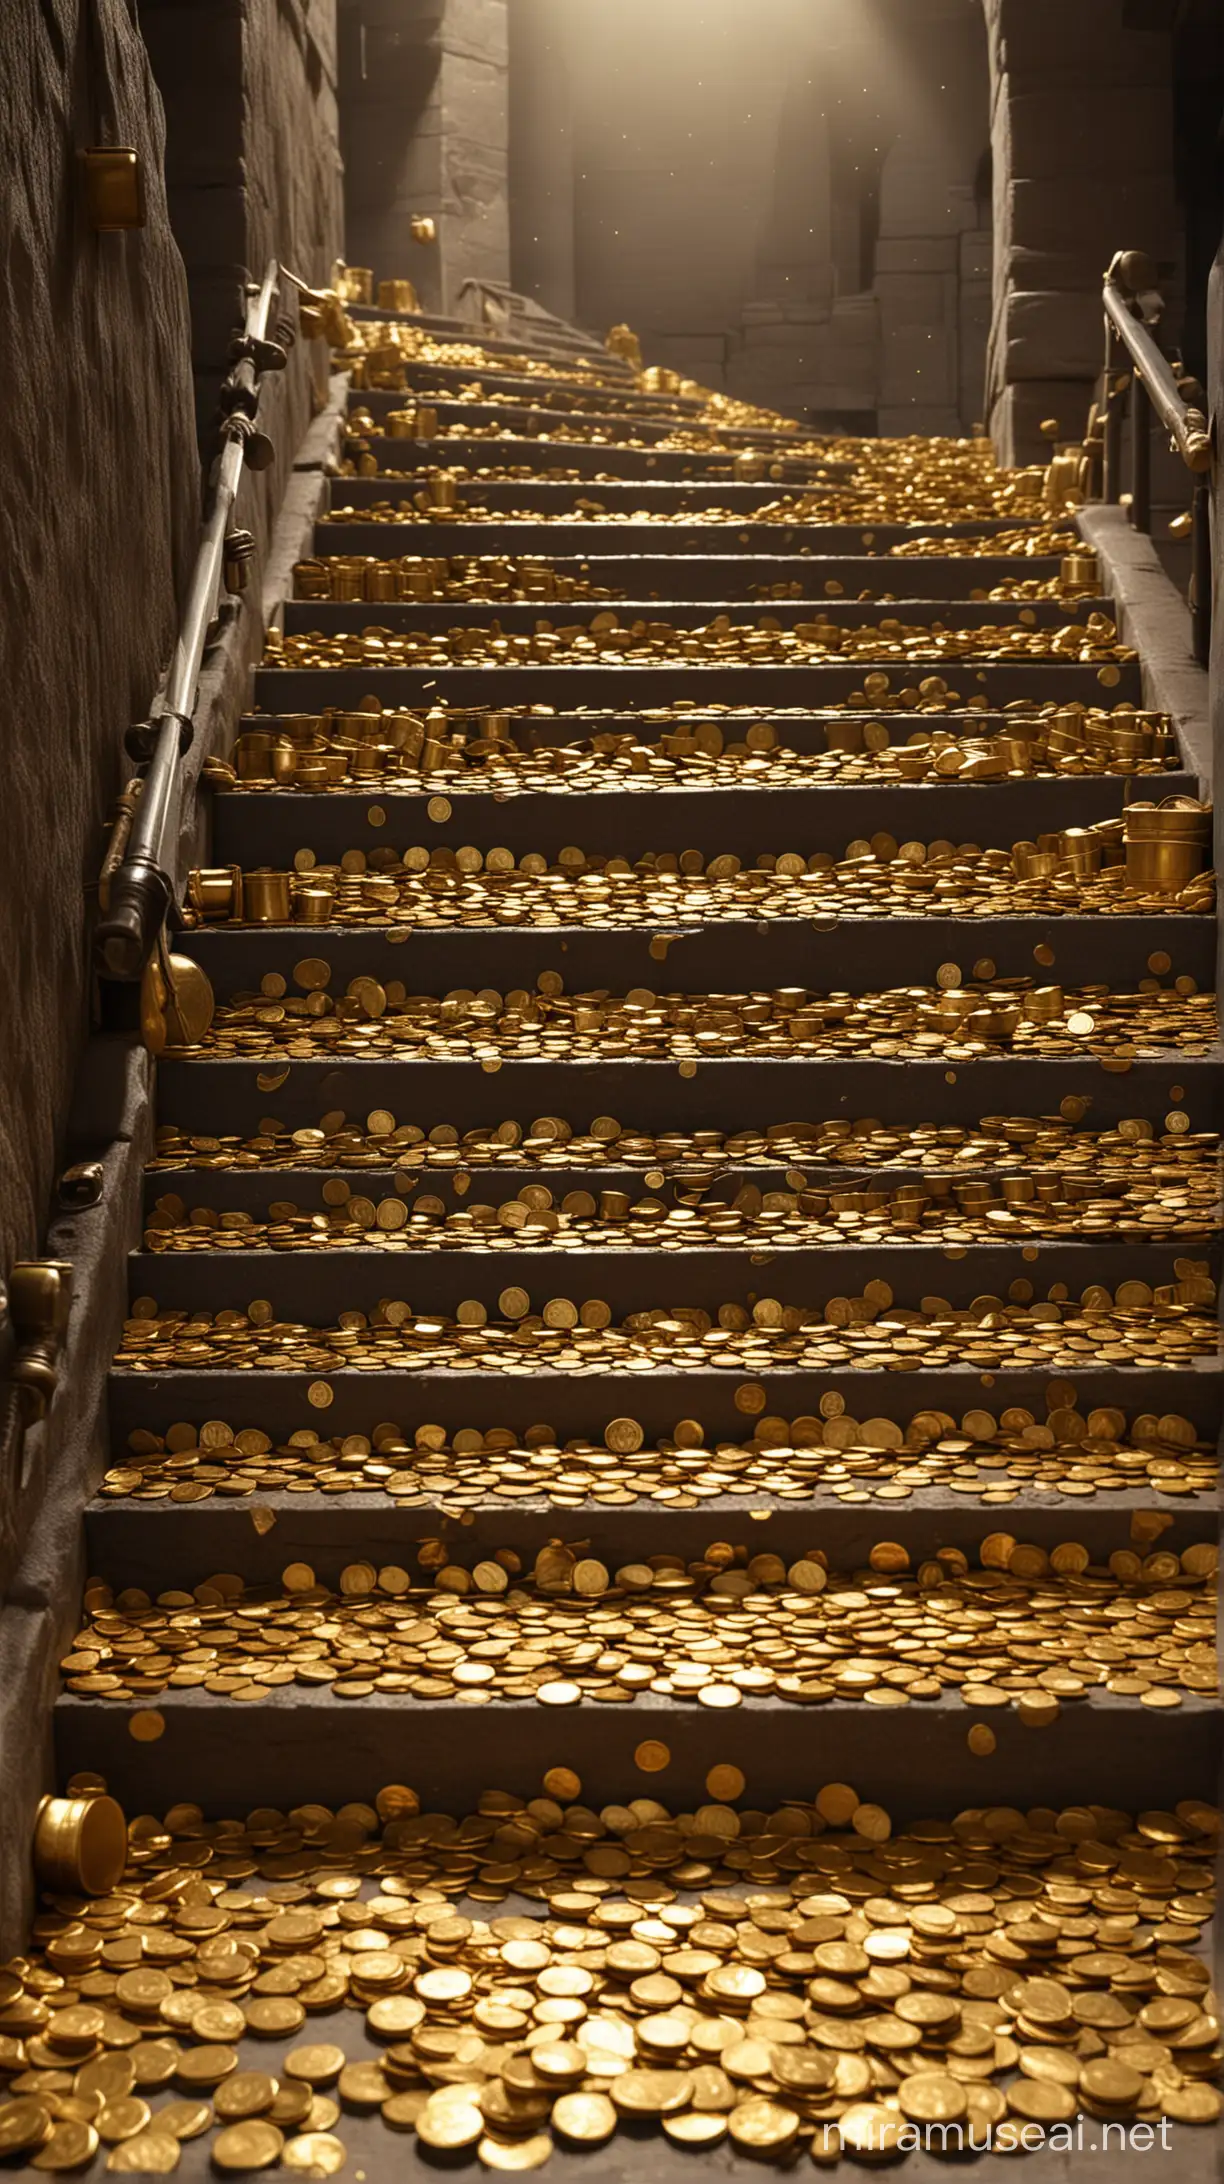 A golden staircase, scattered with gold coins and gold ingots, guarded by a gold warrior with weapons HD